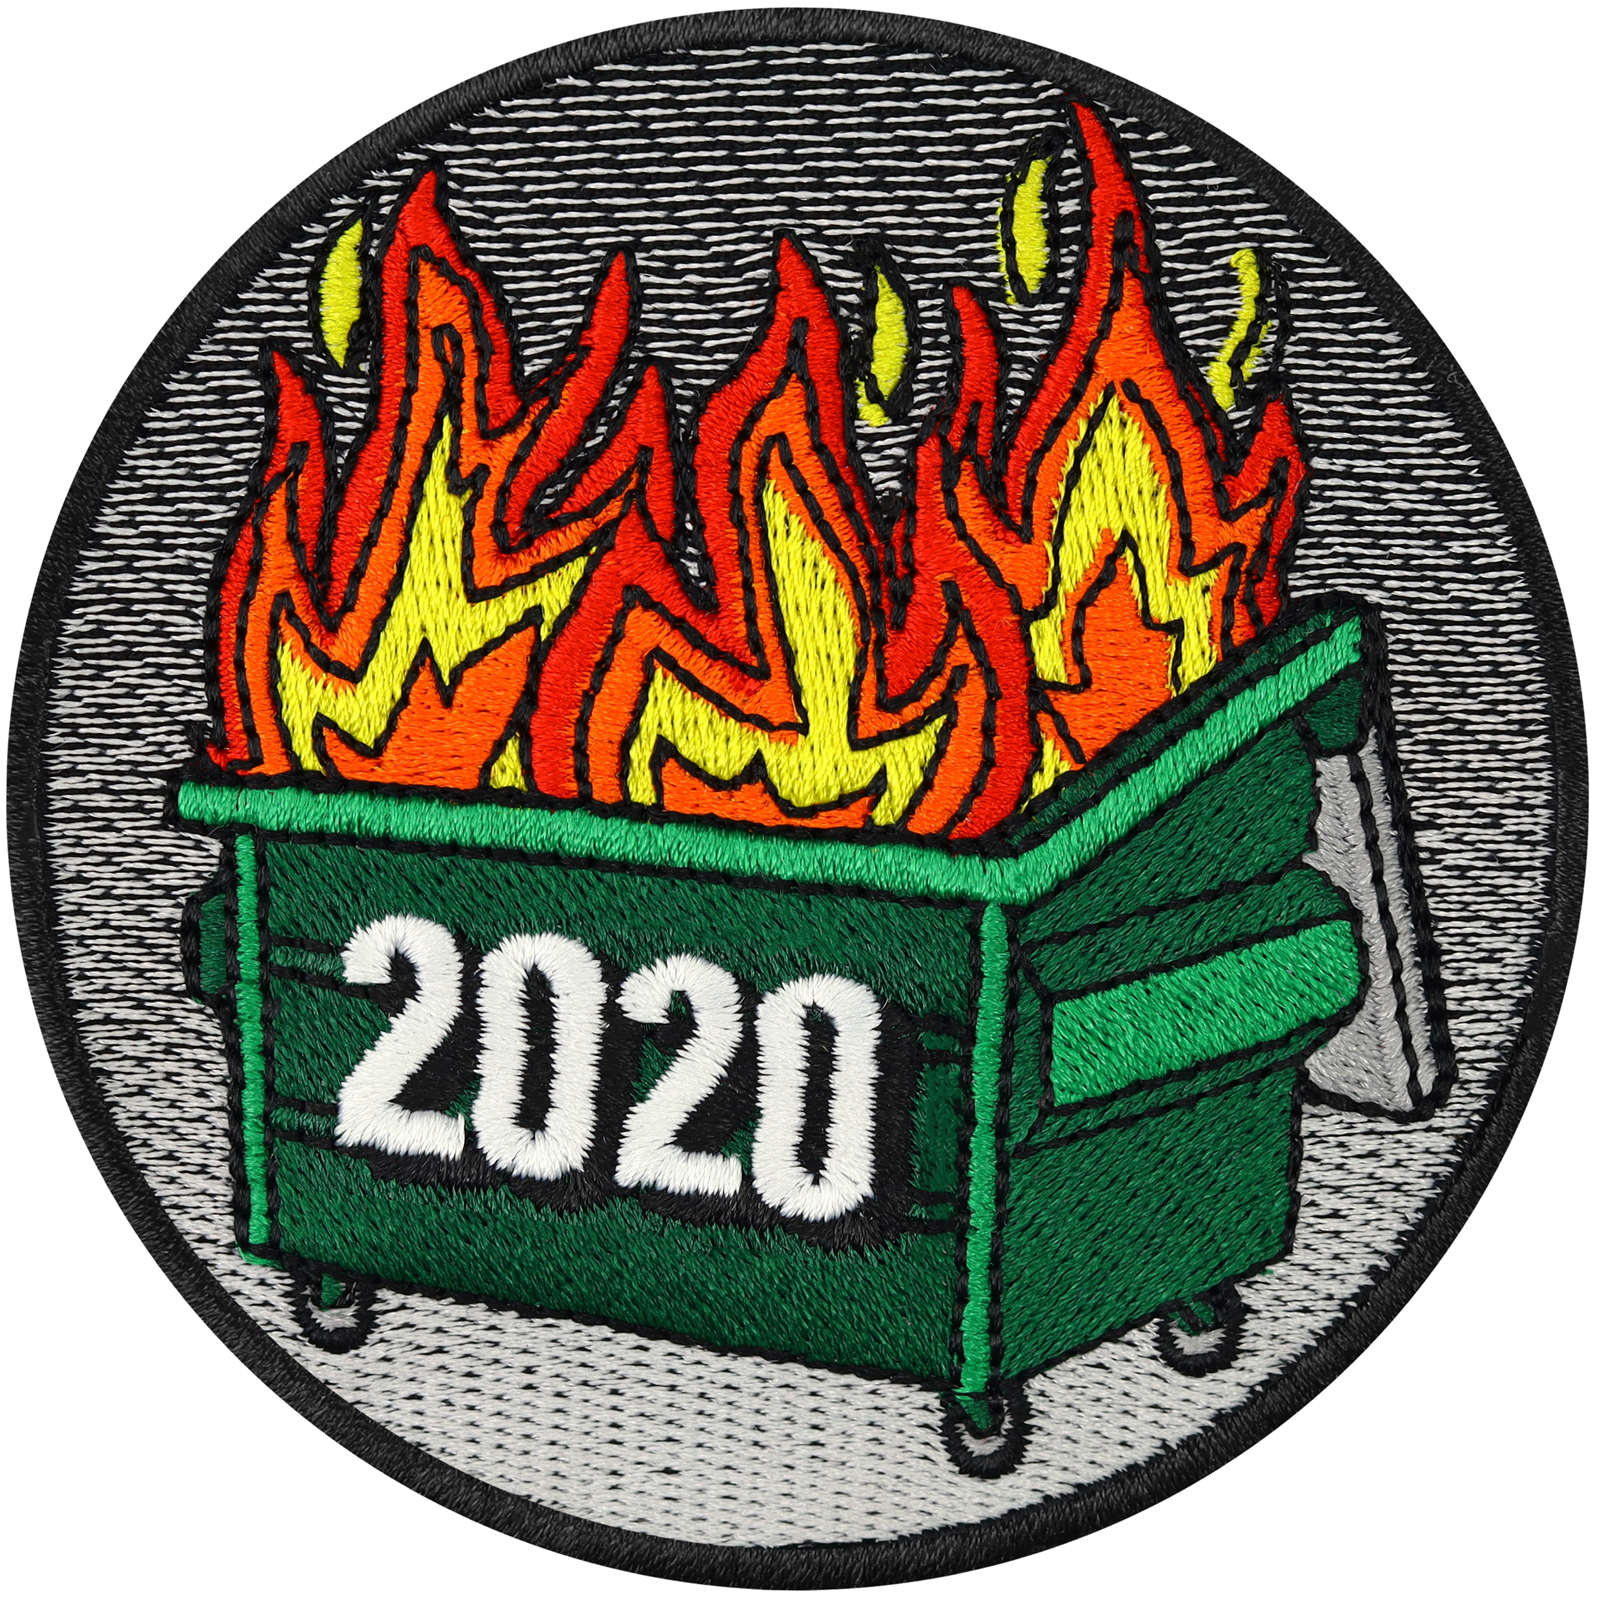 2020 burning - Patch